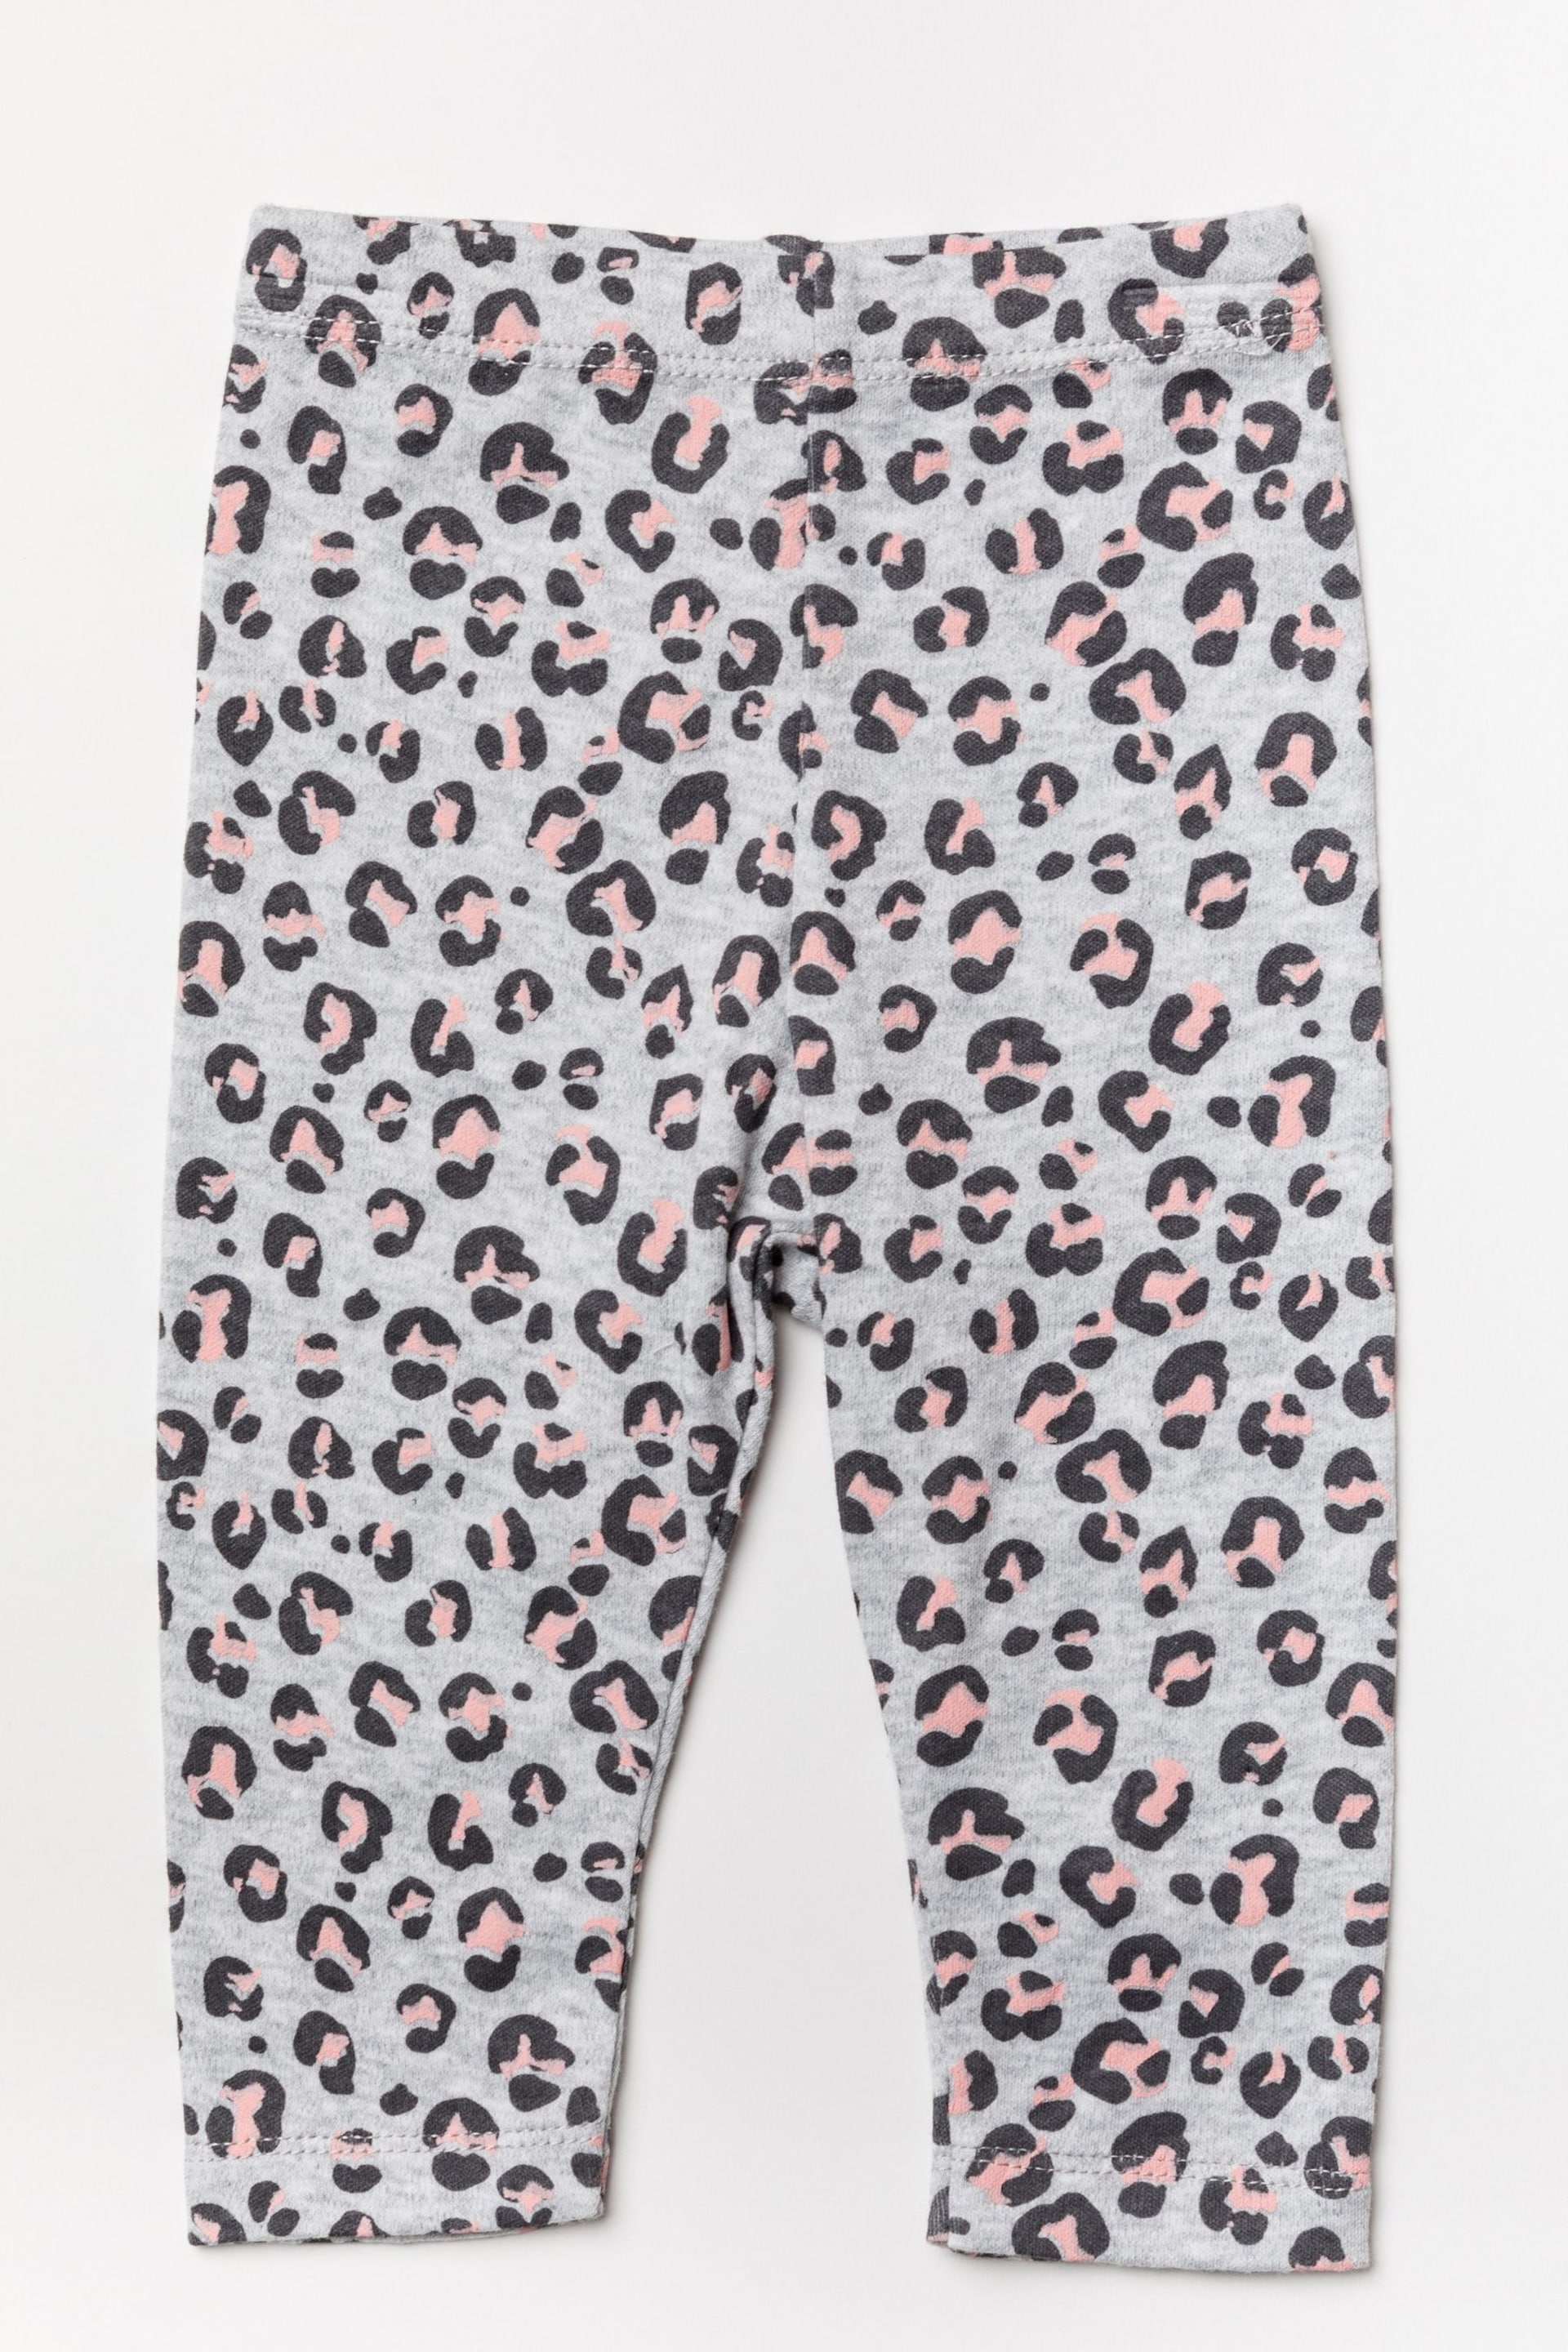 Lily & Jack Pink Cat Print Cotton 2-Piece Top and Trouser Set - Image 3 of 3